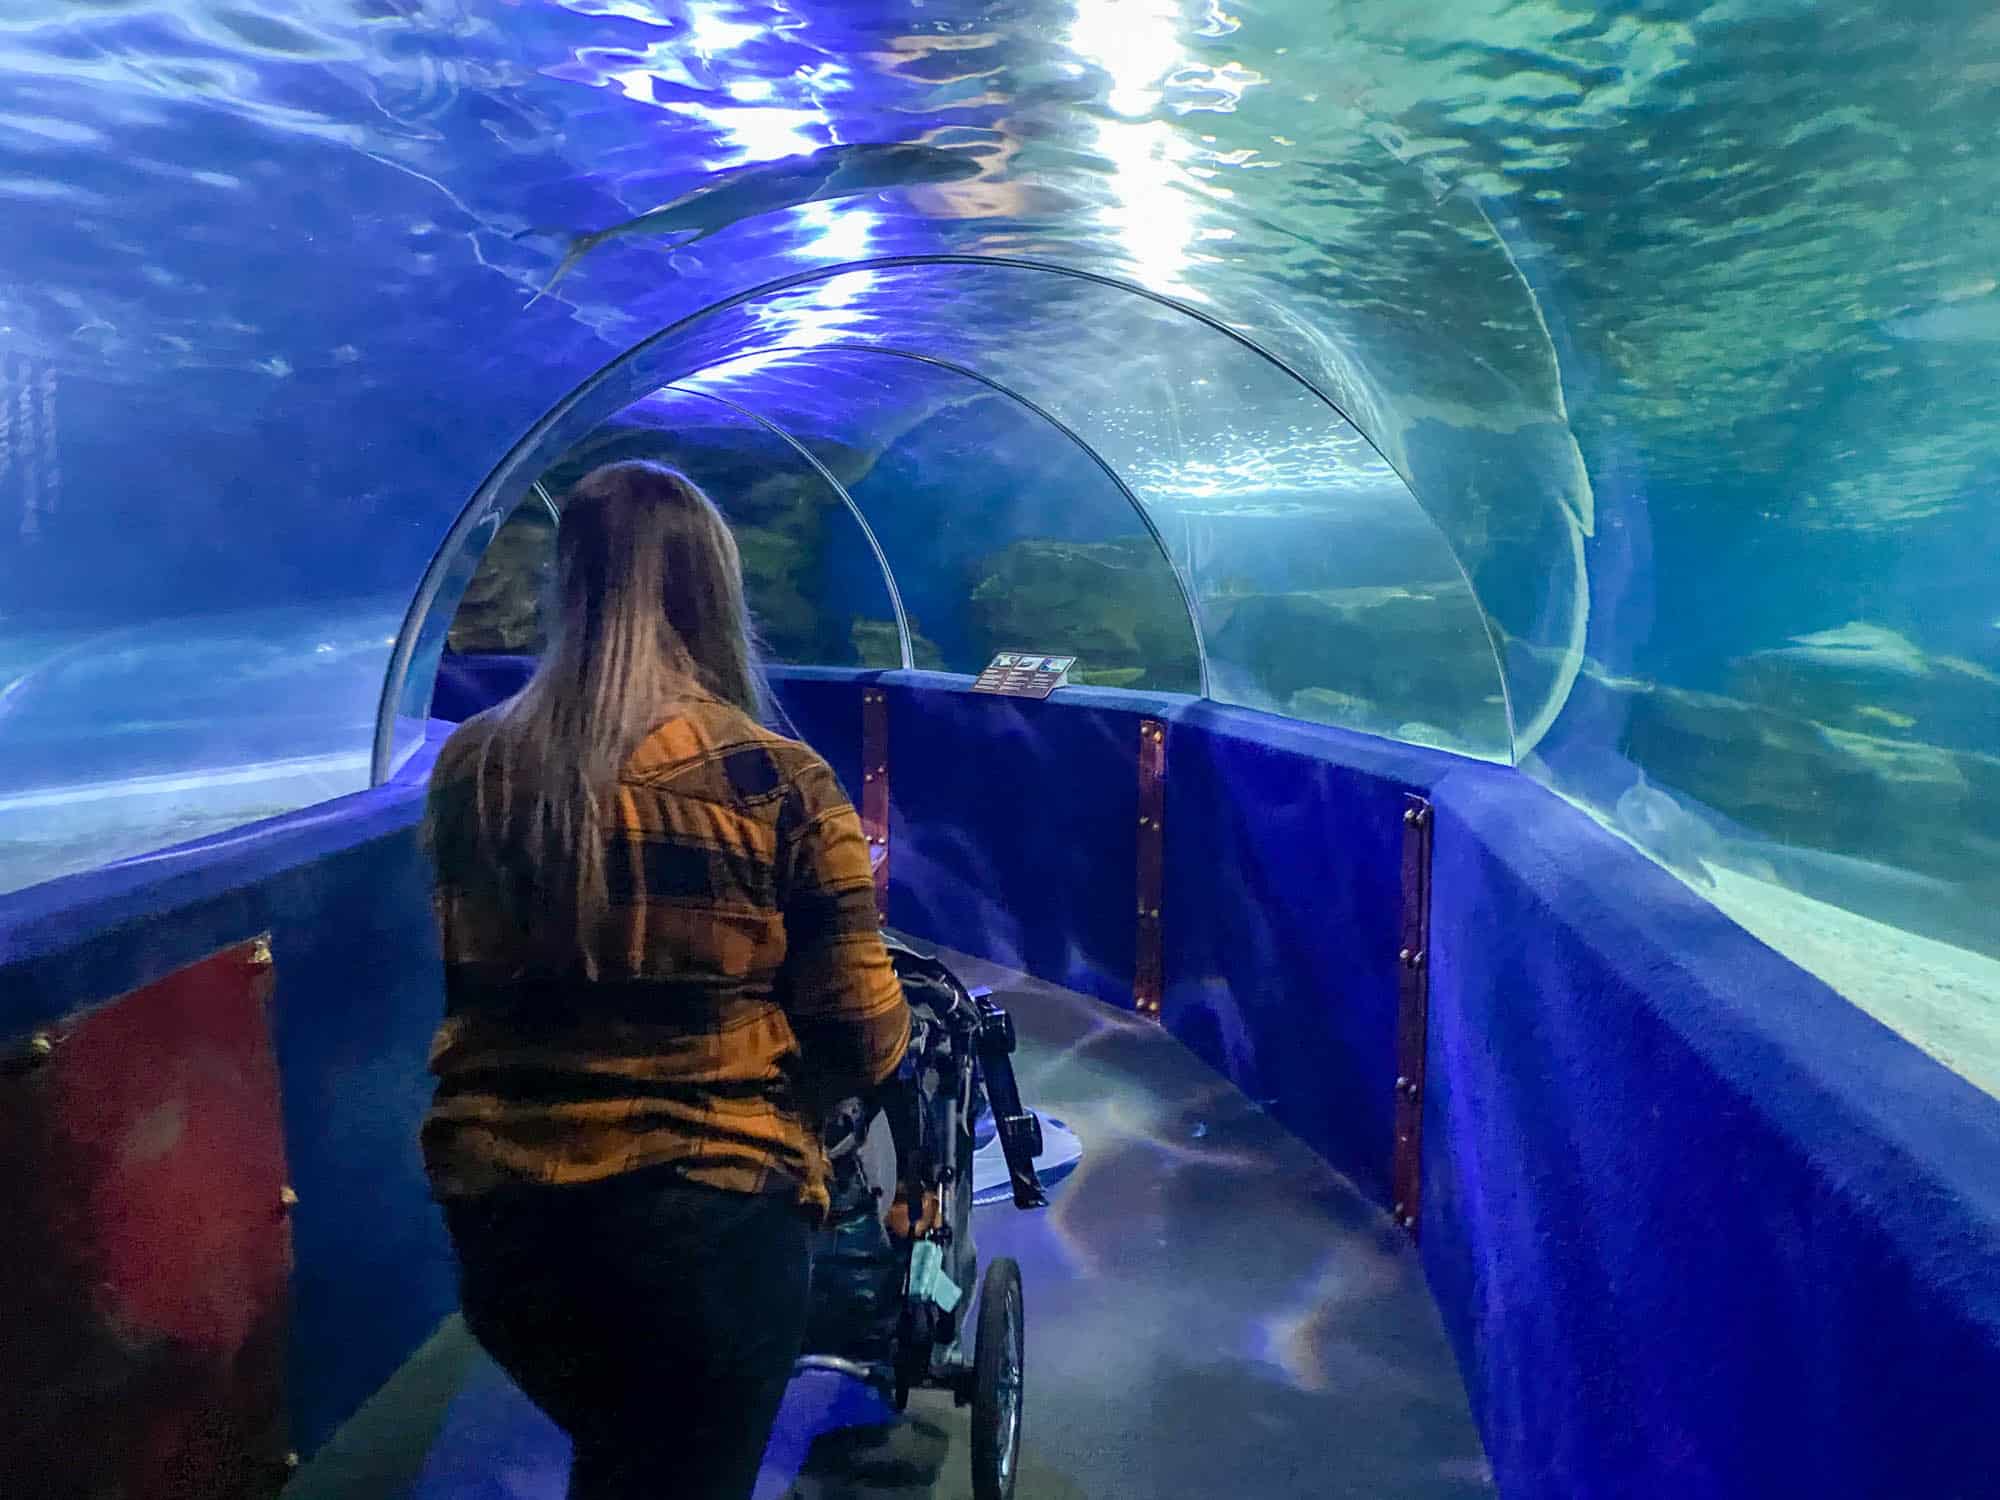 Pushing a stroller inside the shark tunnel at Greater Cleveland Aquarium